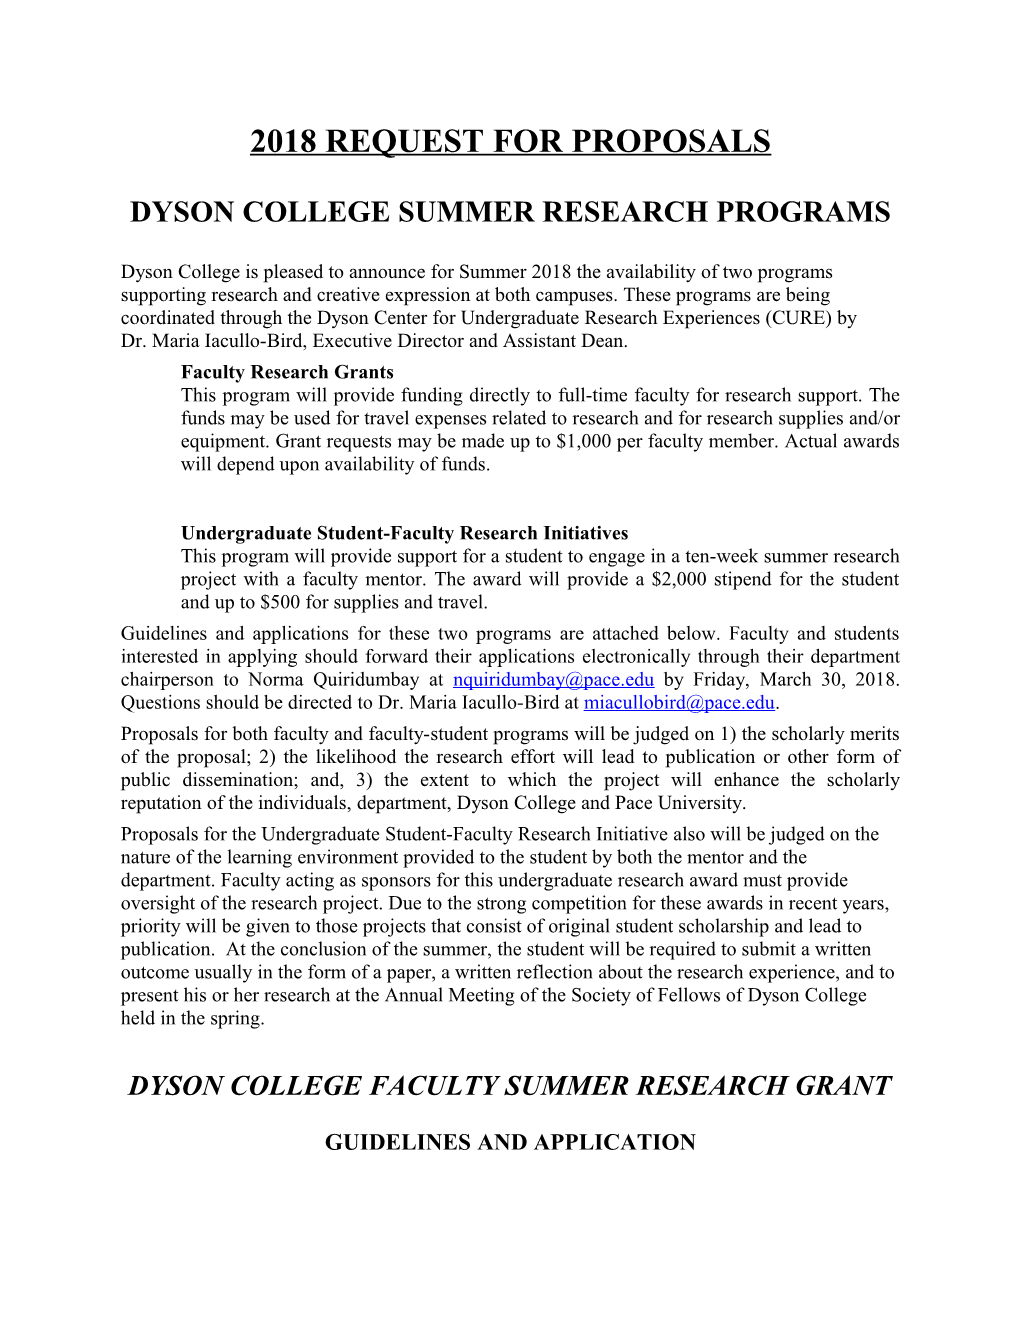 Dyson College Summer Research Programs